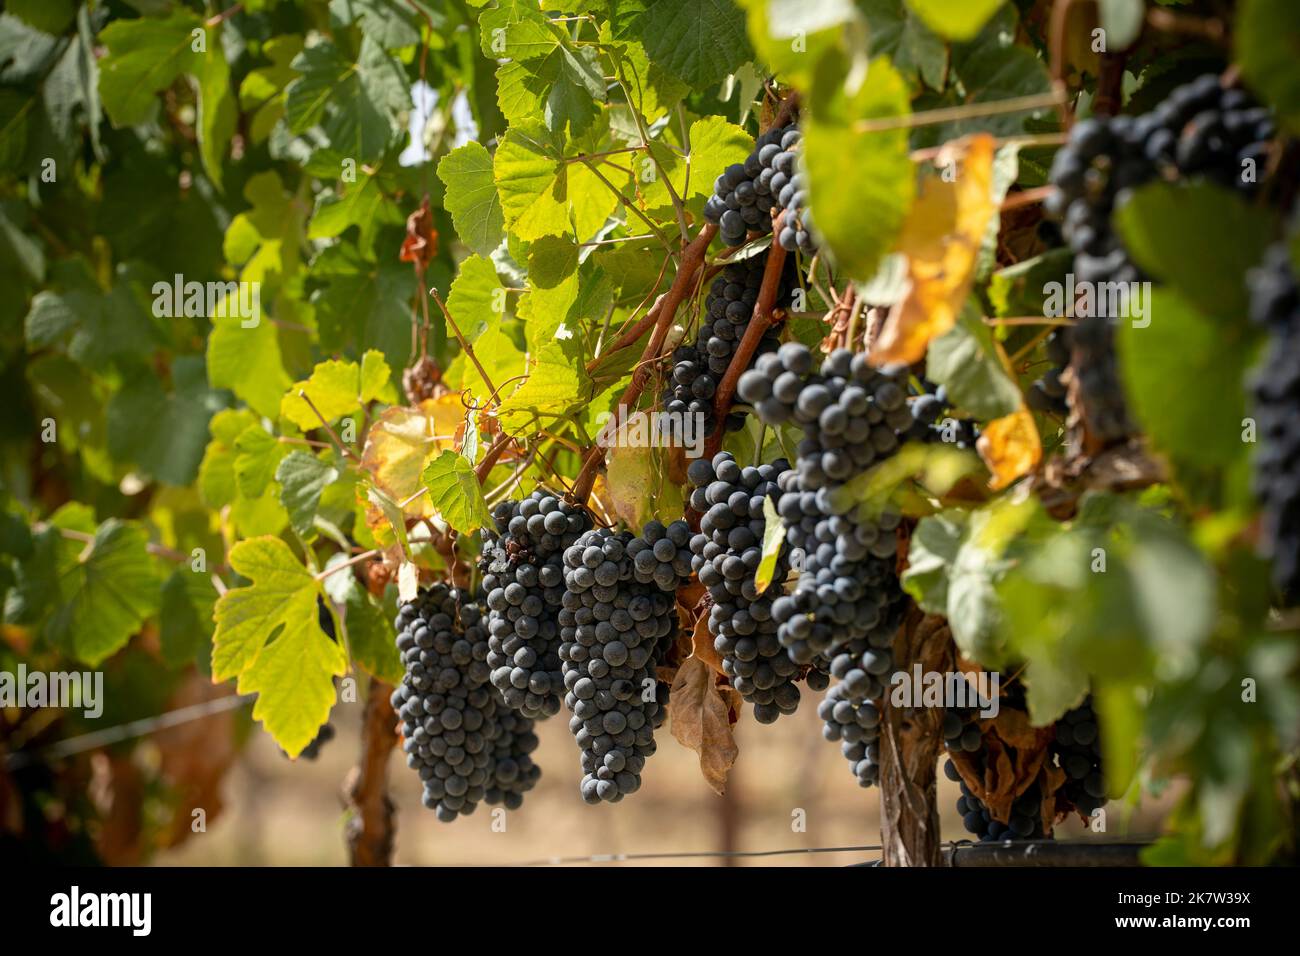 Clusters of red wine grapes growing in vineyard Stock Photo